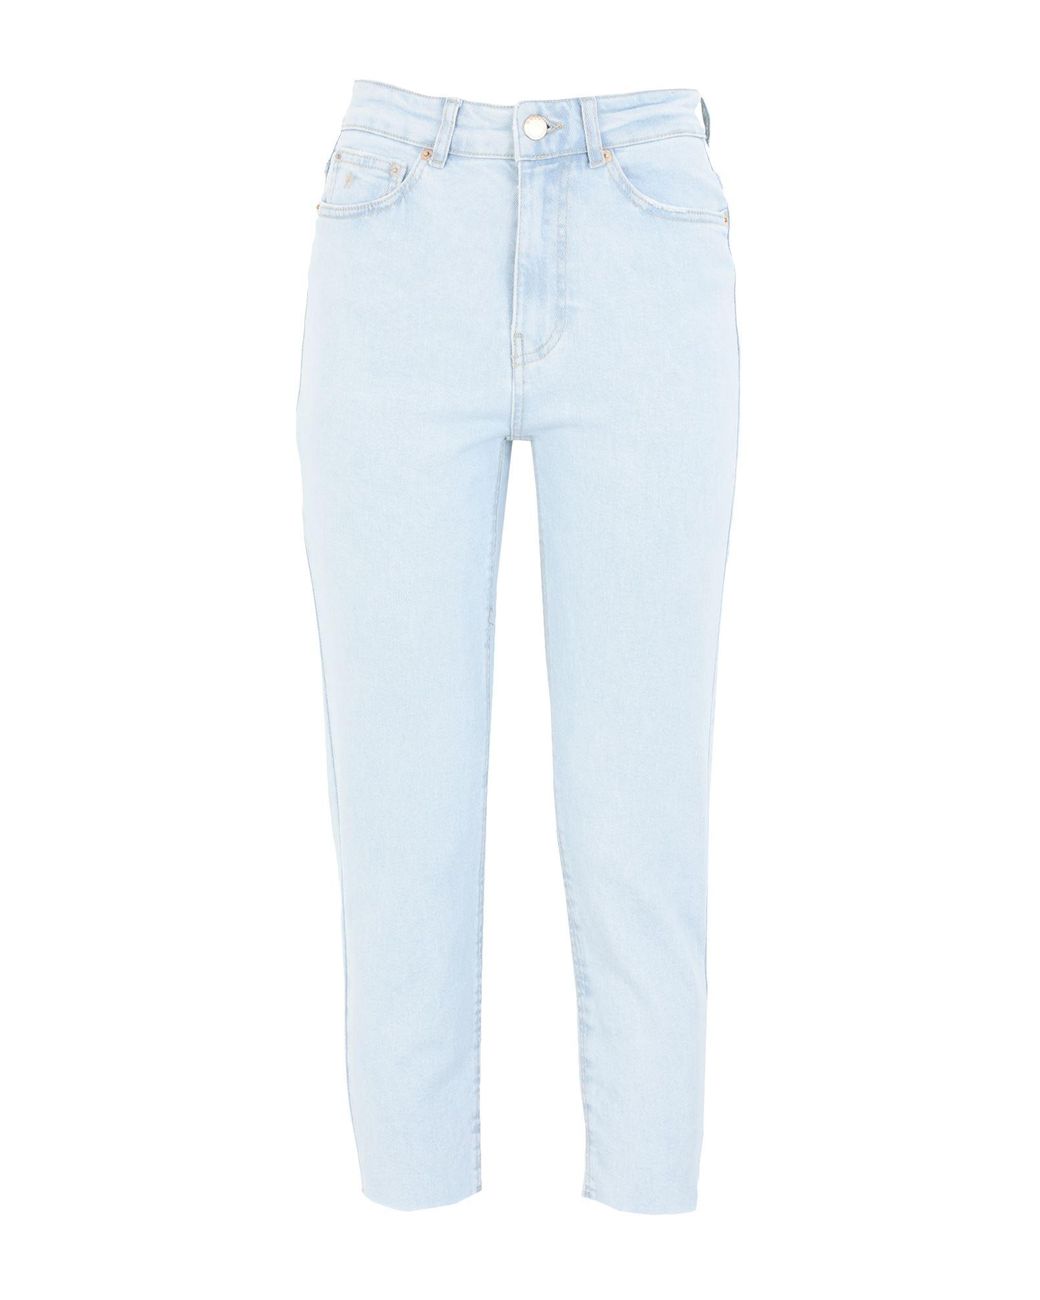 ONLY Denim Pants in Blue - Lyst